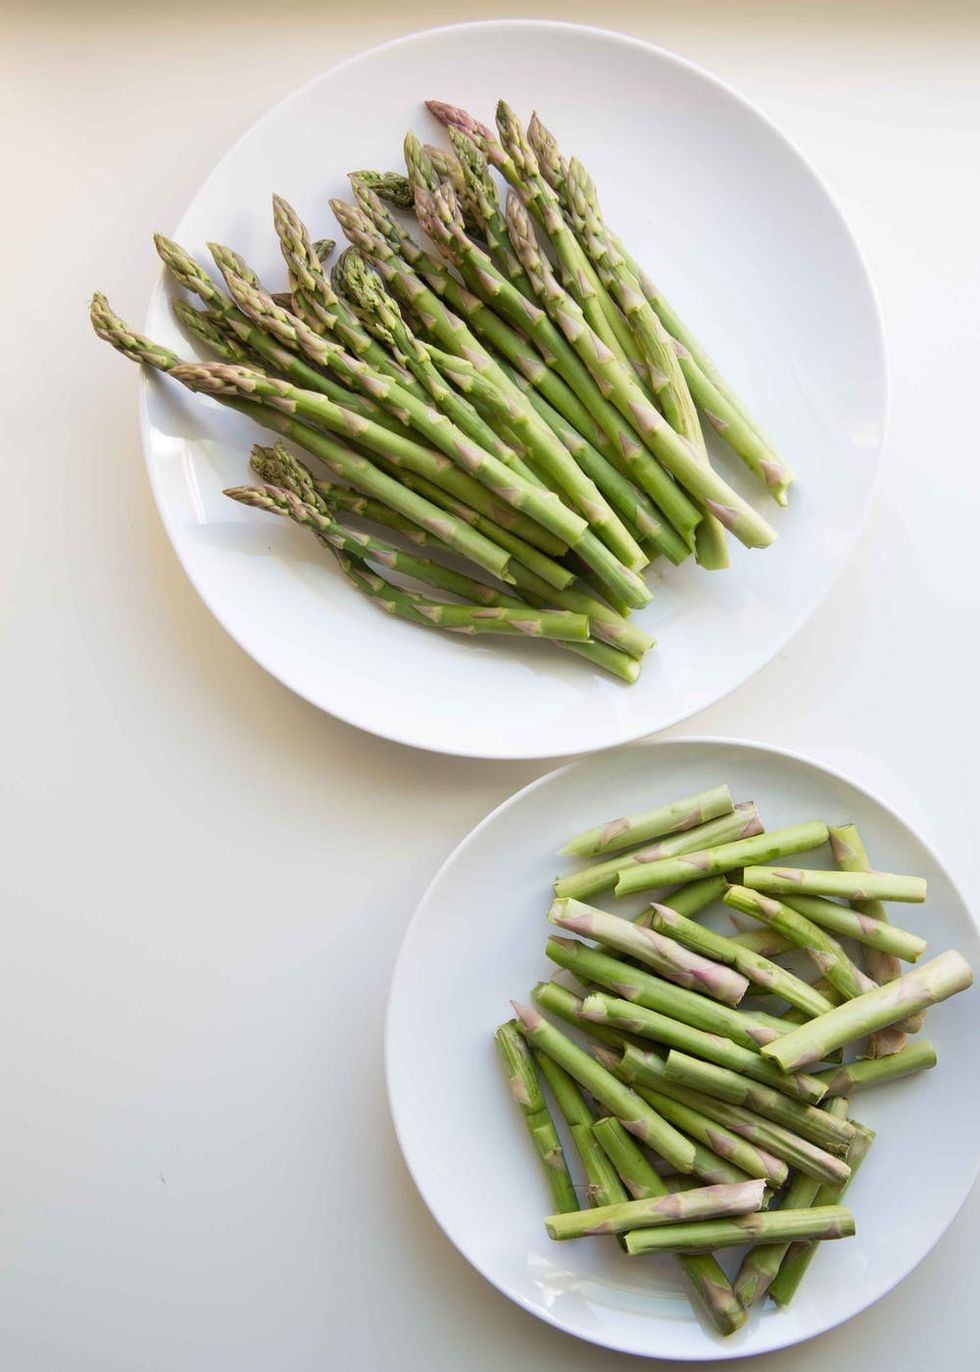 When eating asparagus, snap off the woody ends. You can use them once softened as an ingredient for asparagus soup.